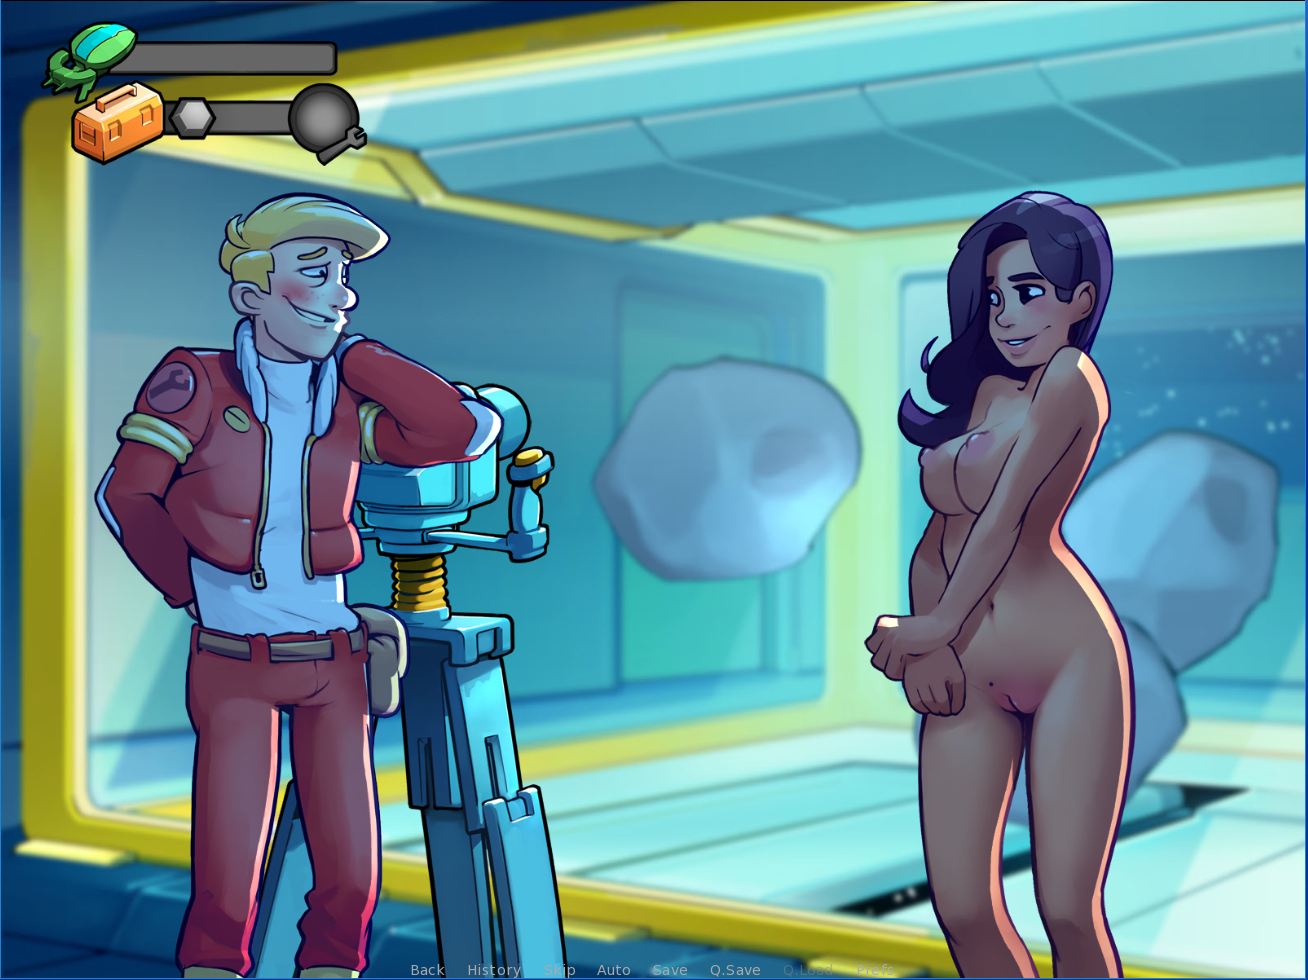 Anal Sex Space - Space Rescue: Code Pink Ren'Py Porn Sex Game v.9.0 Download for Windows,  MacOS, Linux, Android